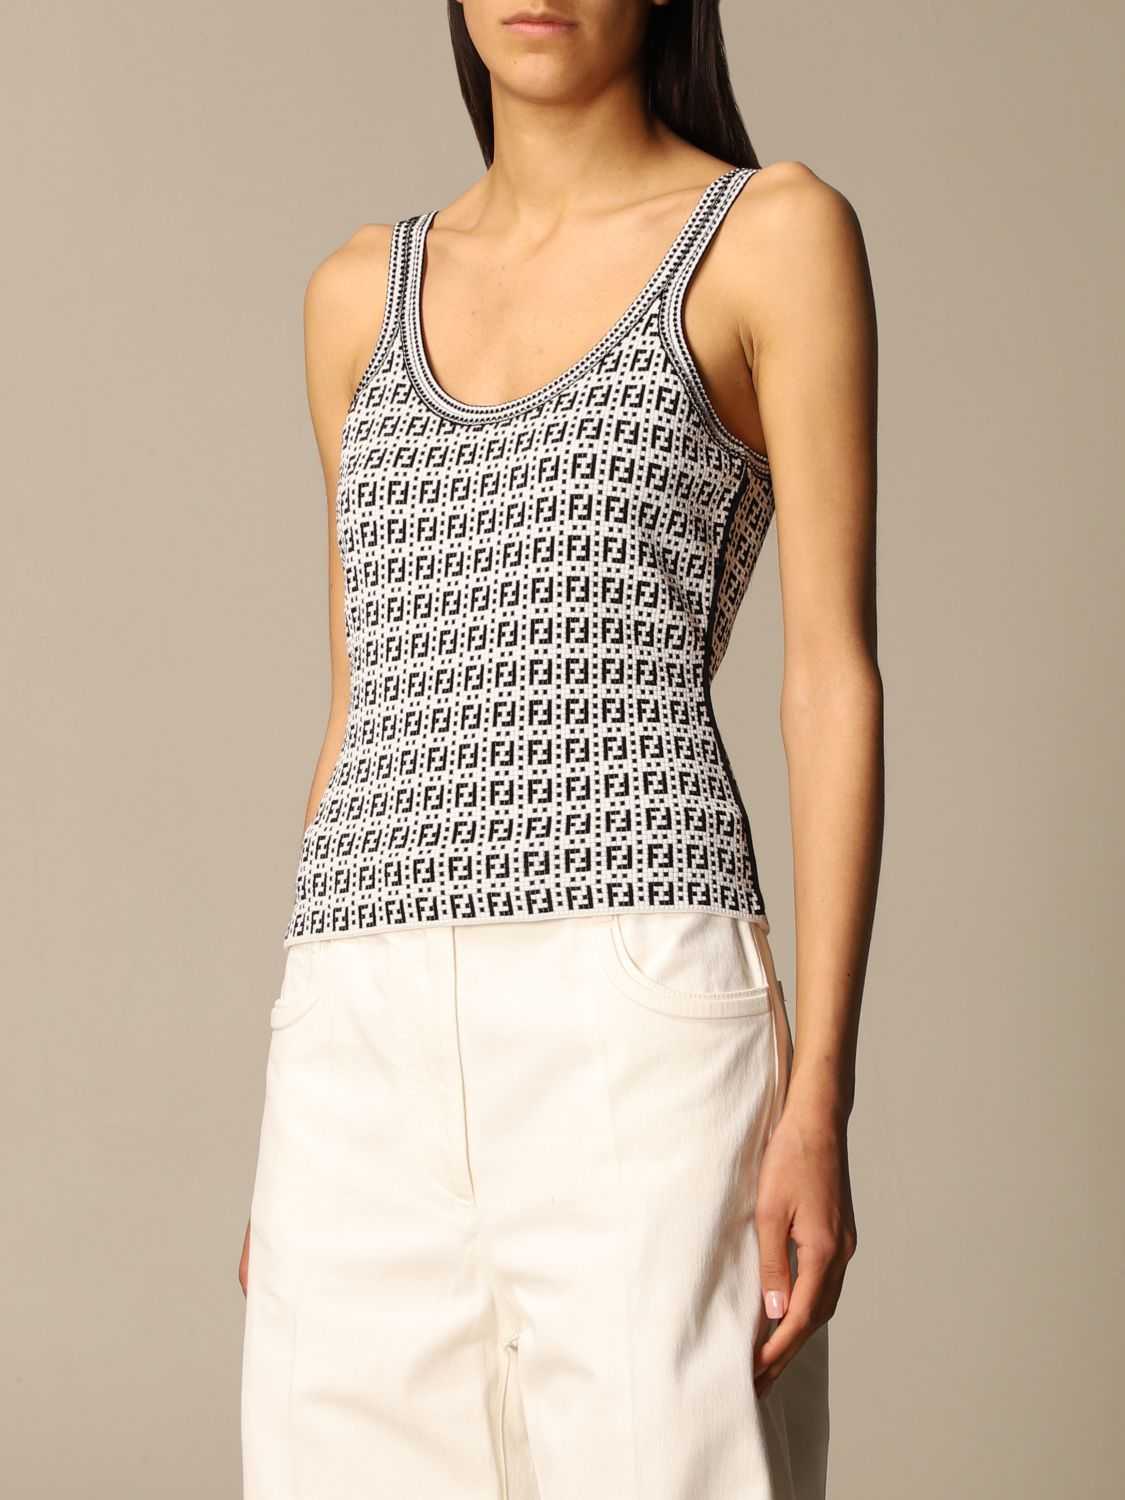 Fendi top with all-over FF monogram